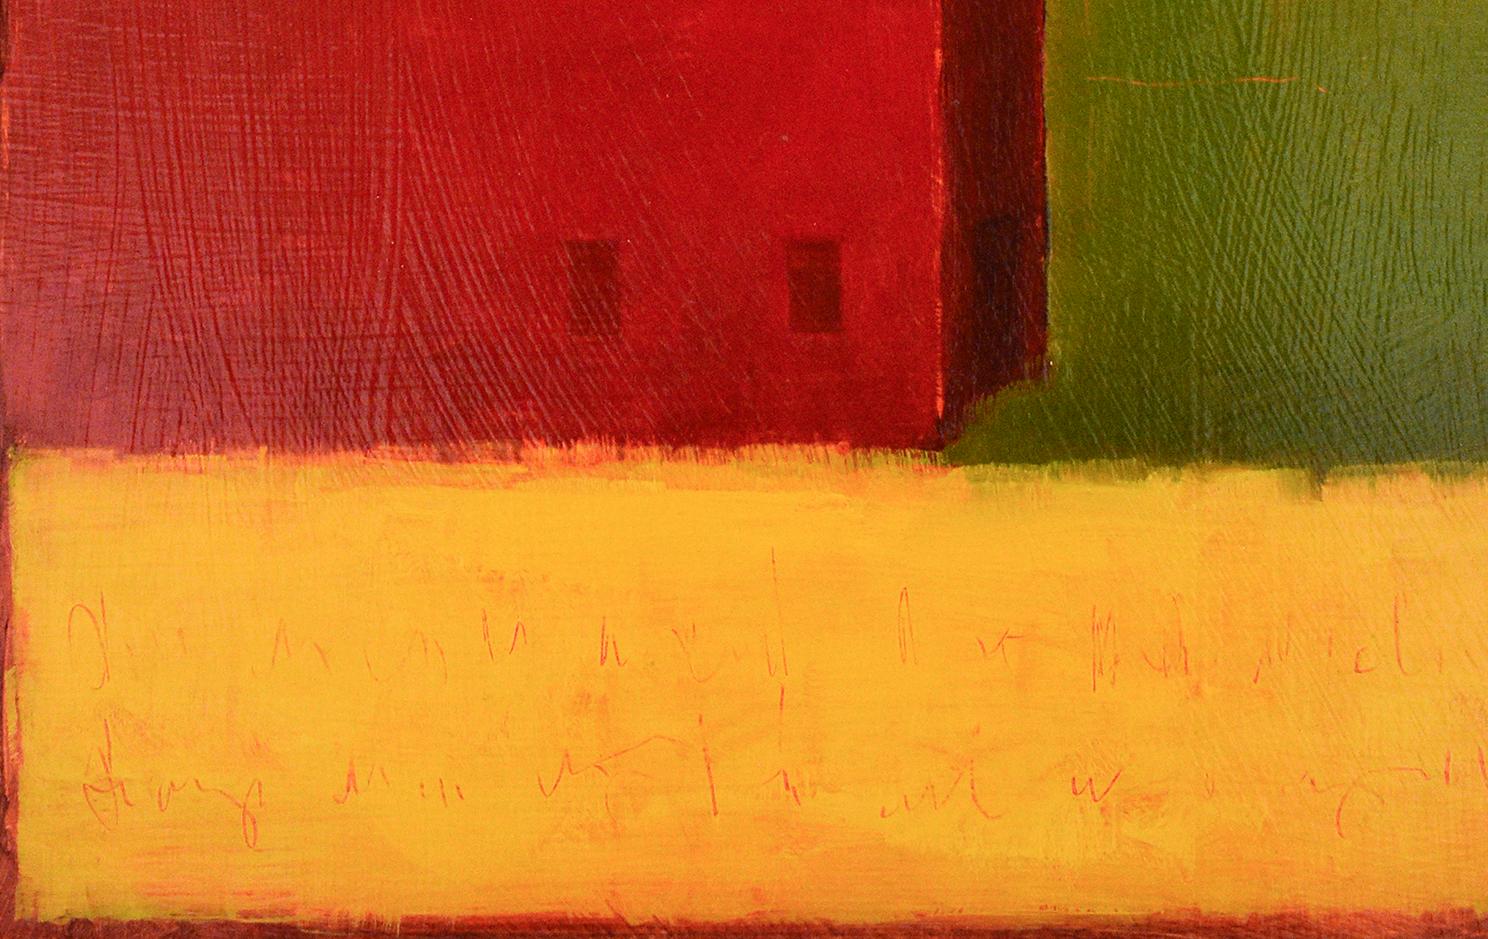 Primarily a Barn (Minimal Abstracted Landscape Painting of a Red Barn on a Farm) - Brown Abstract Painting by Tracy Helgeson